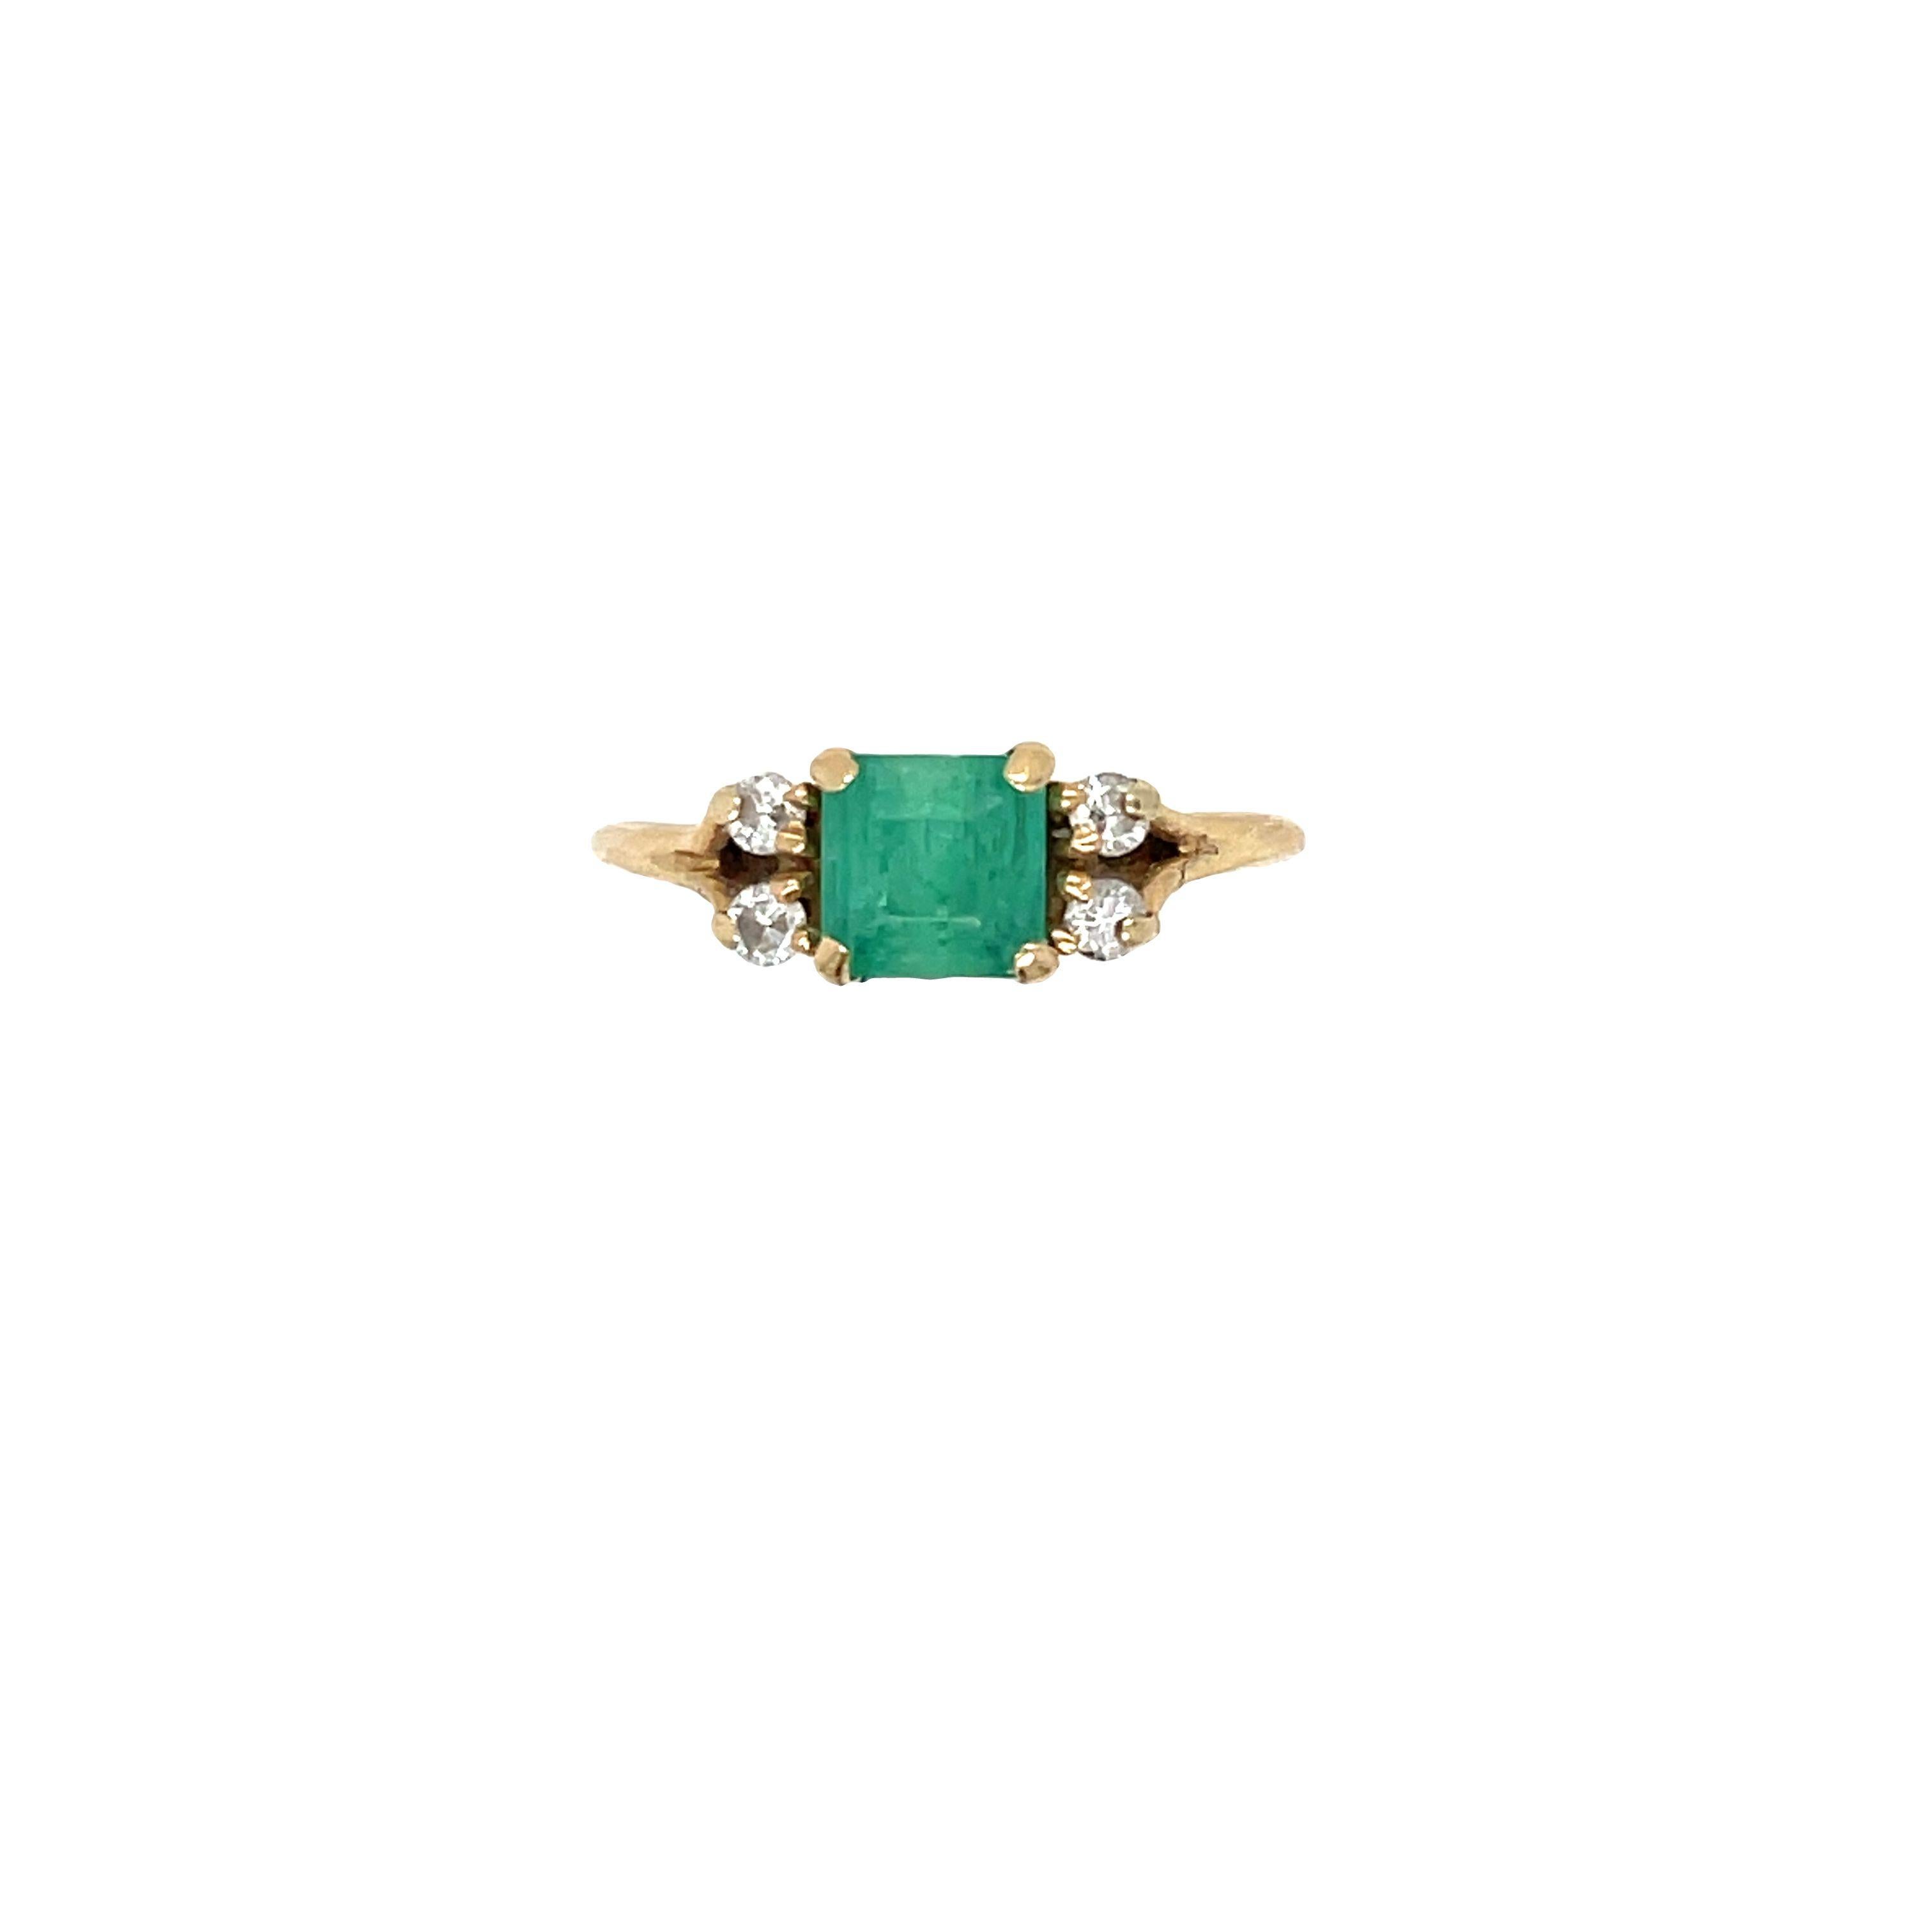 This vintage 14K yellow gold engagement ring is a true beauty with a pop of color! 

The center stone is a standout Square step-cut Emerald, measuring 5.75 x 5.75 x 3.5 mm and estimated at 0.90 carat. It truly stands out. Further enhanced with 2